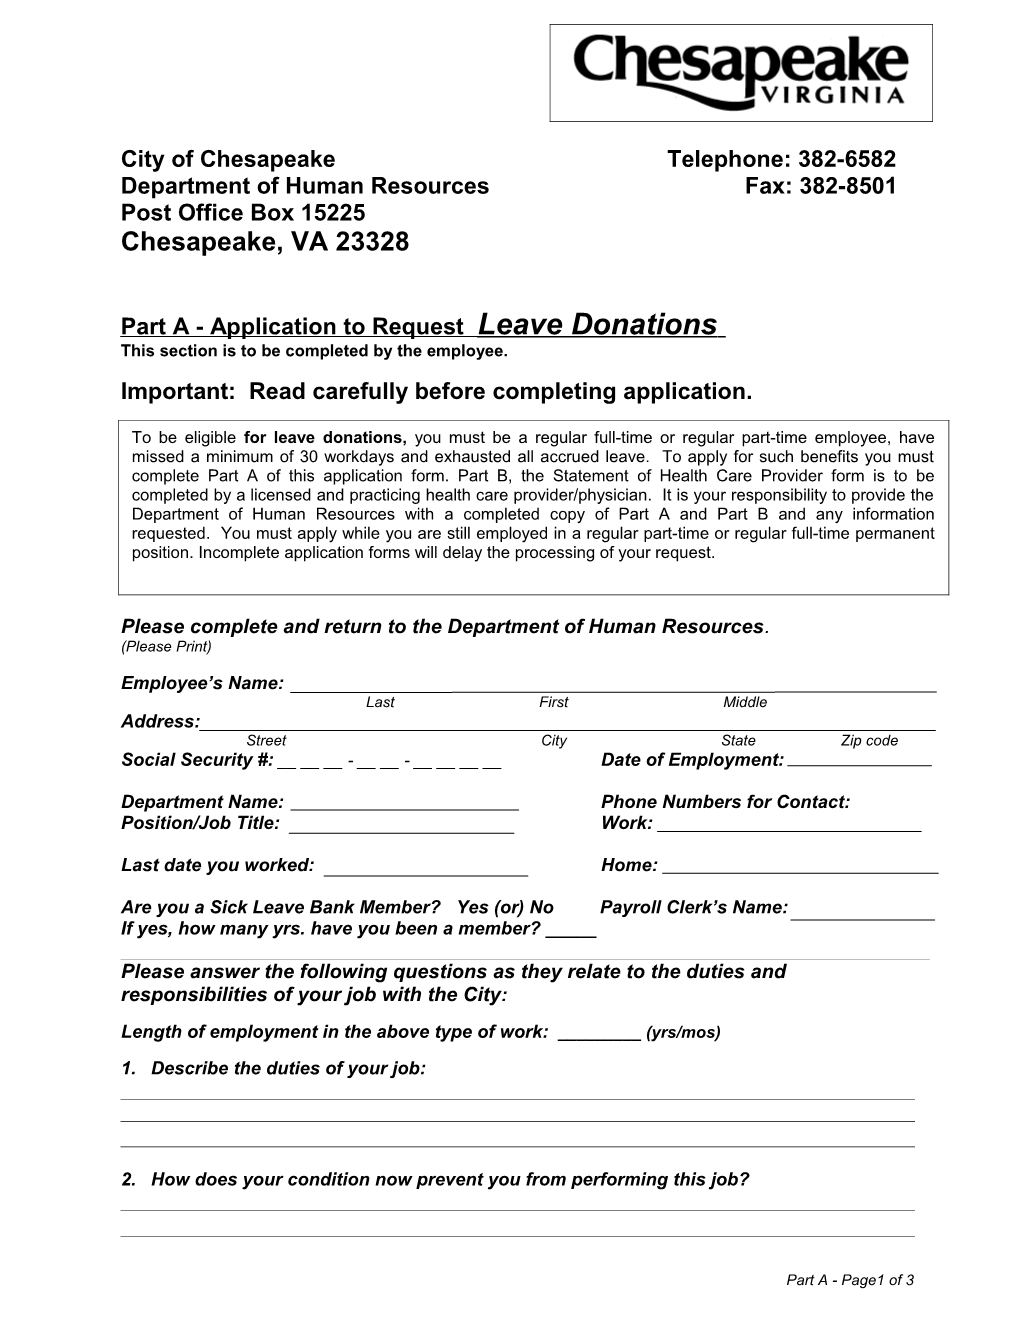 Department of Human Resources Fax: 382-8501